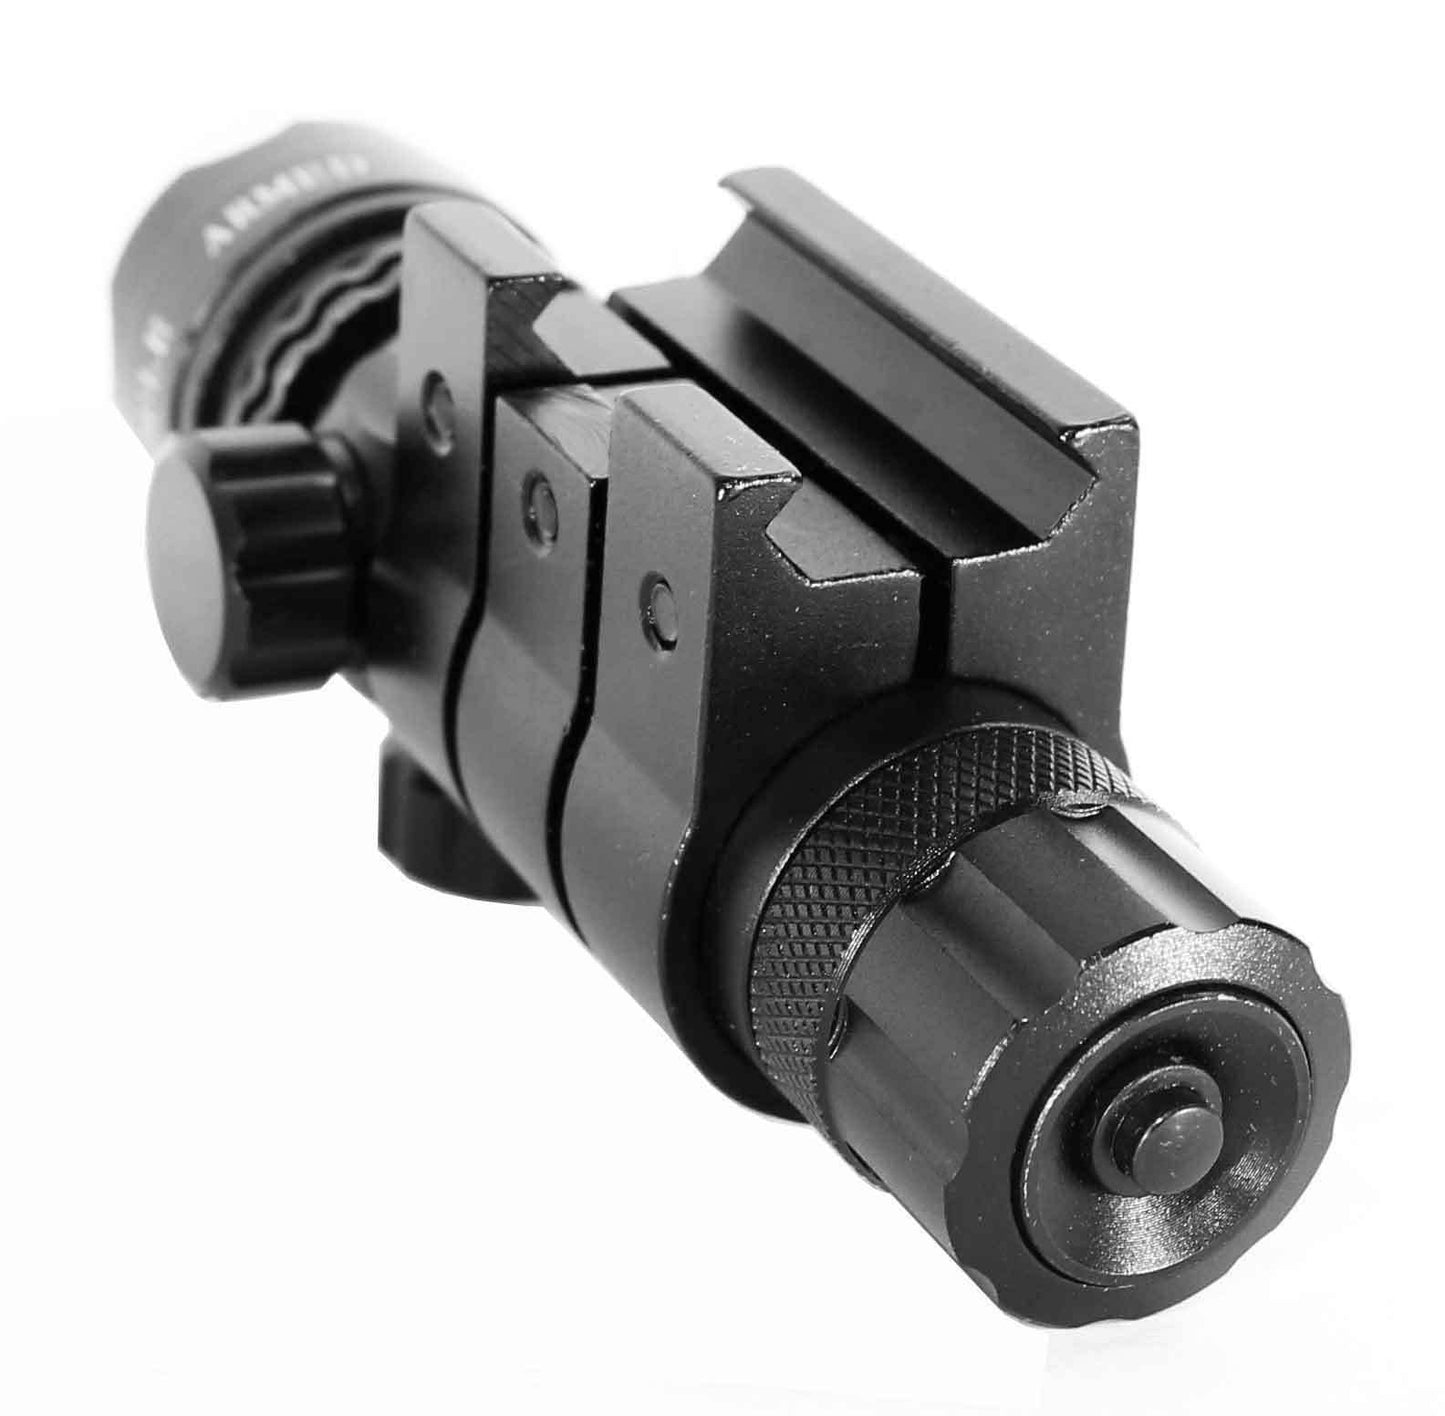 Tactical green laser sight and 1000 Lumen flashlight combo for 12 gauge pumps.